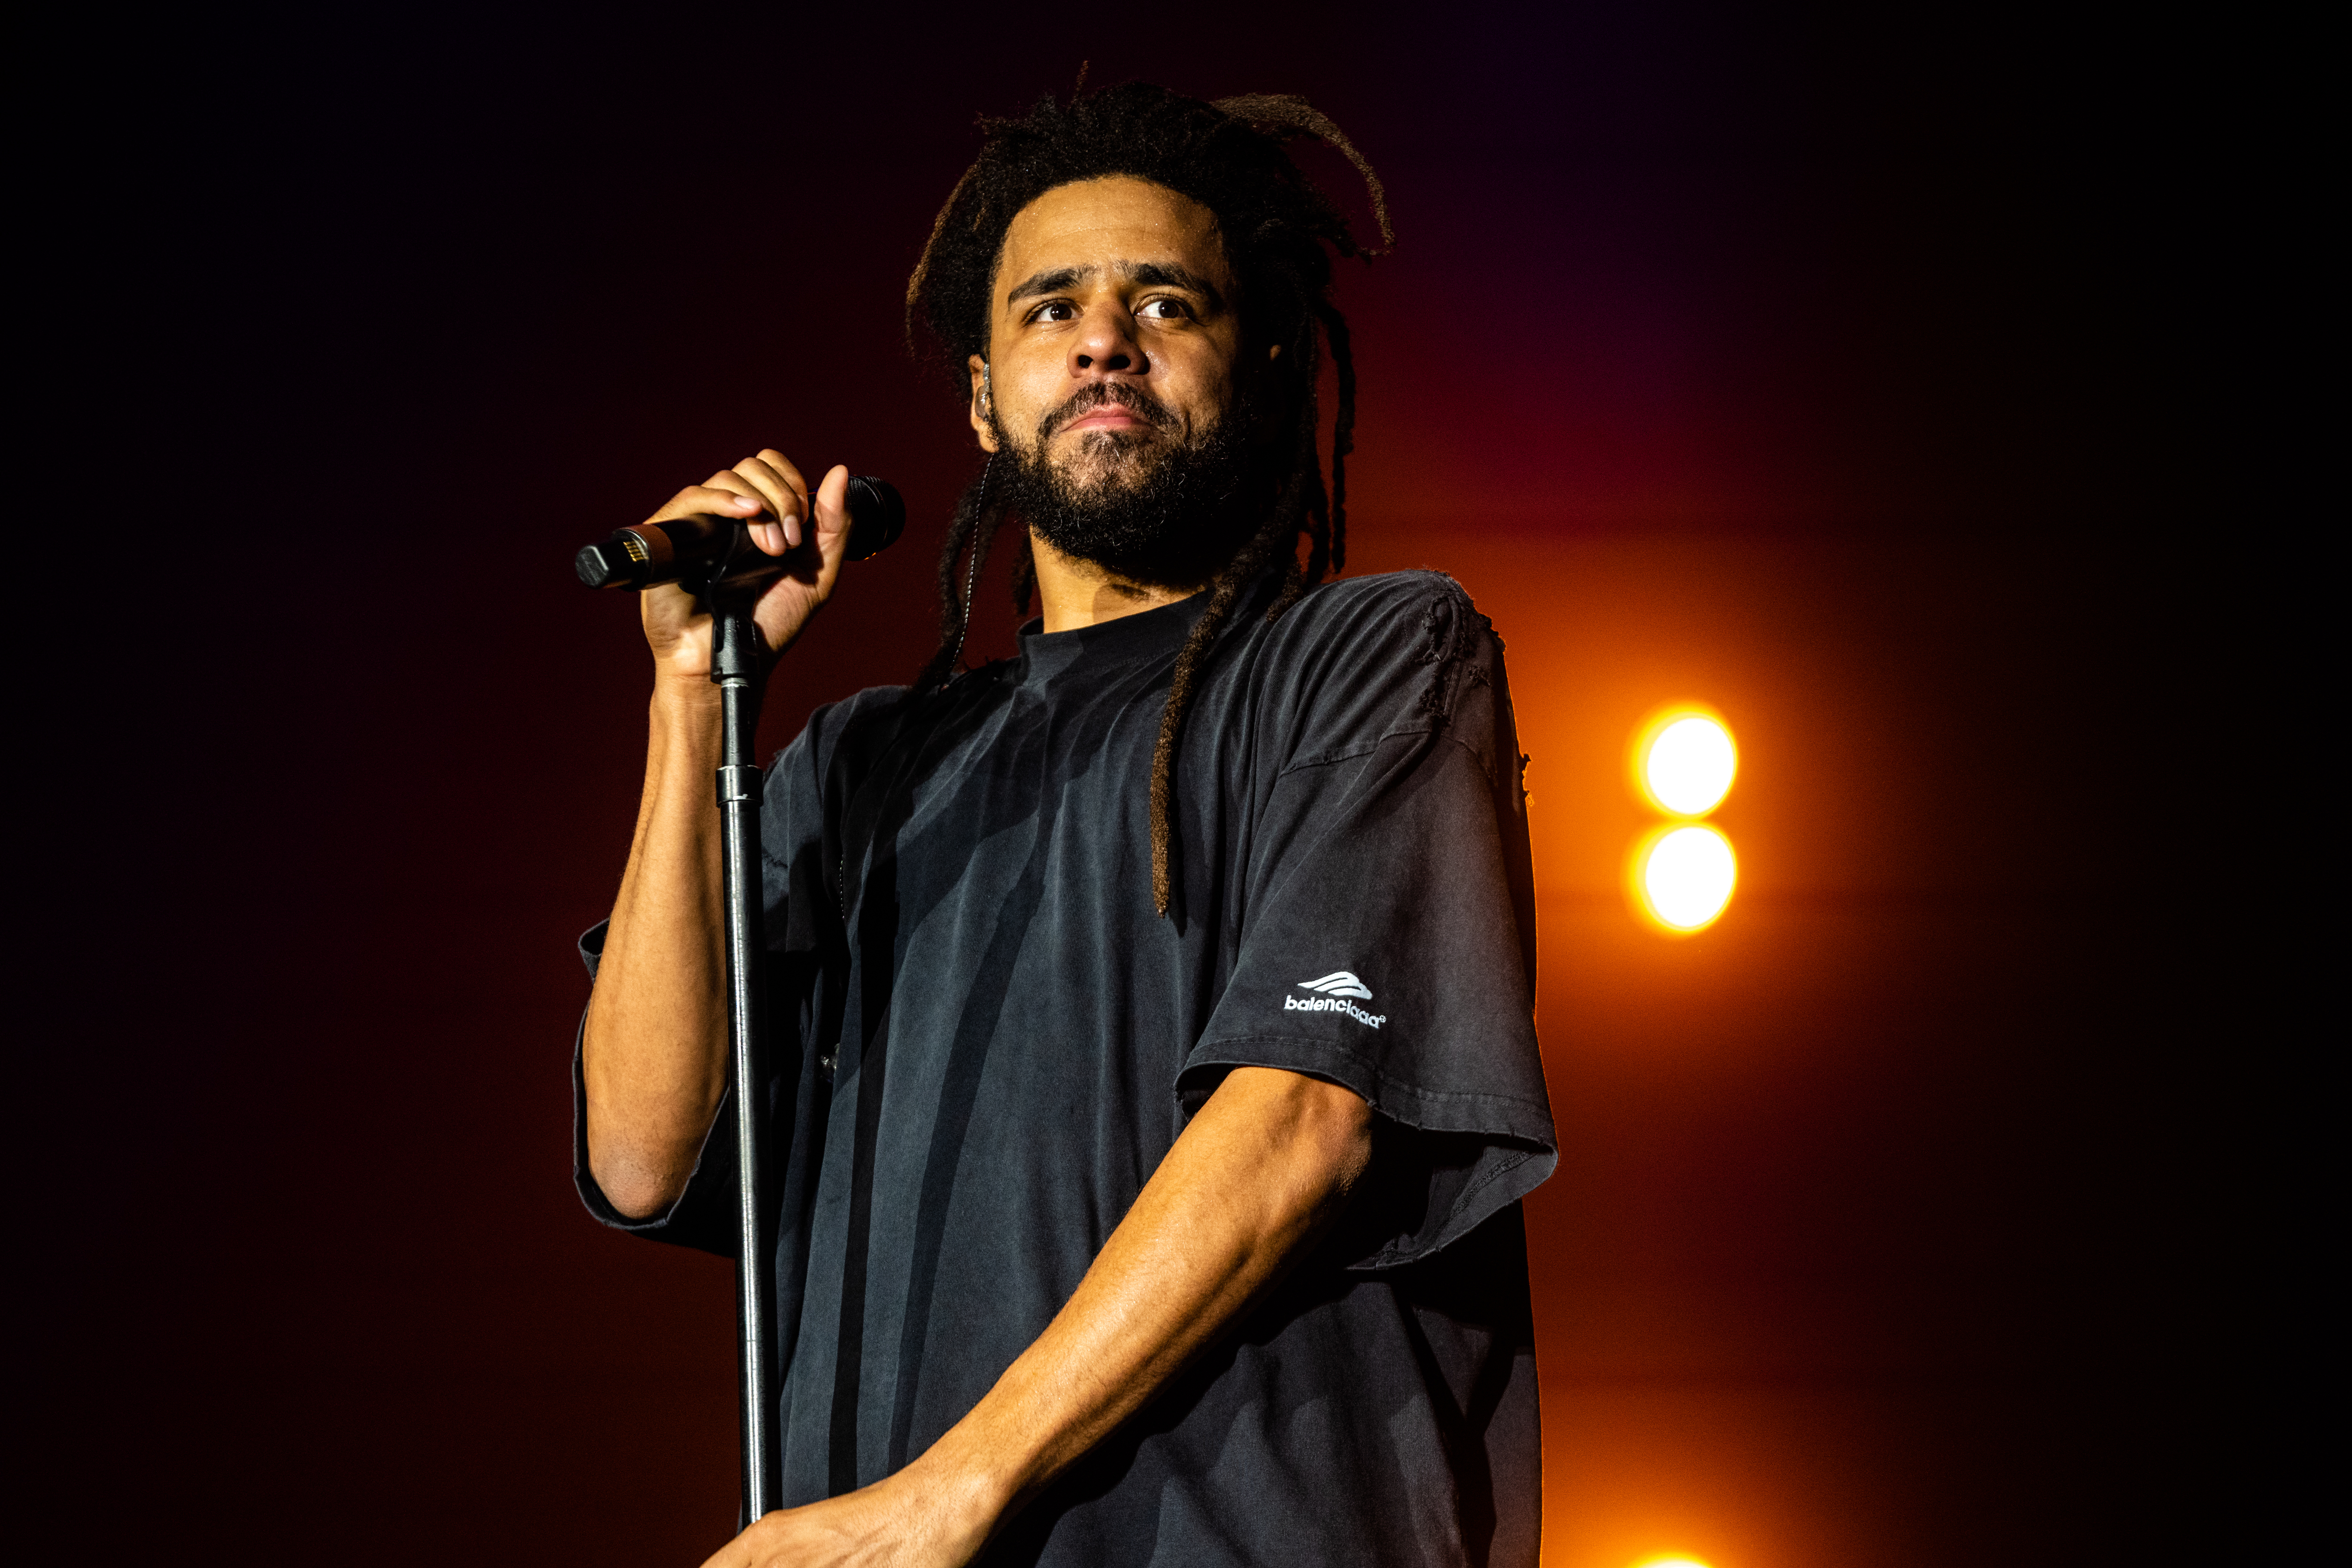 J. Cole’s Manager Hints At A New Album Dropping Soon